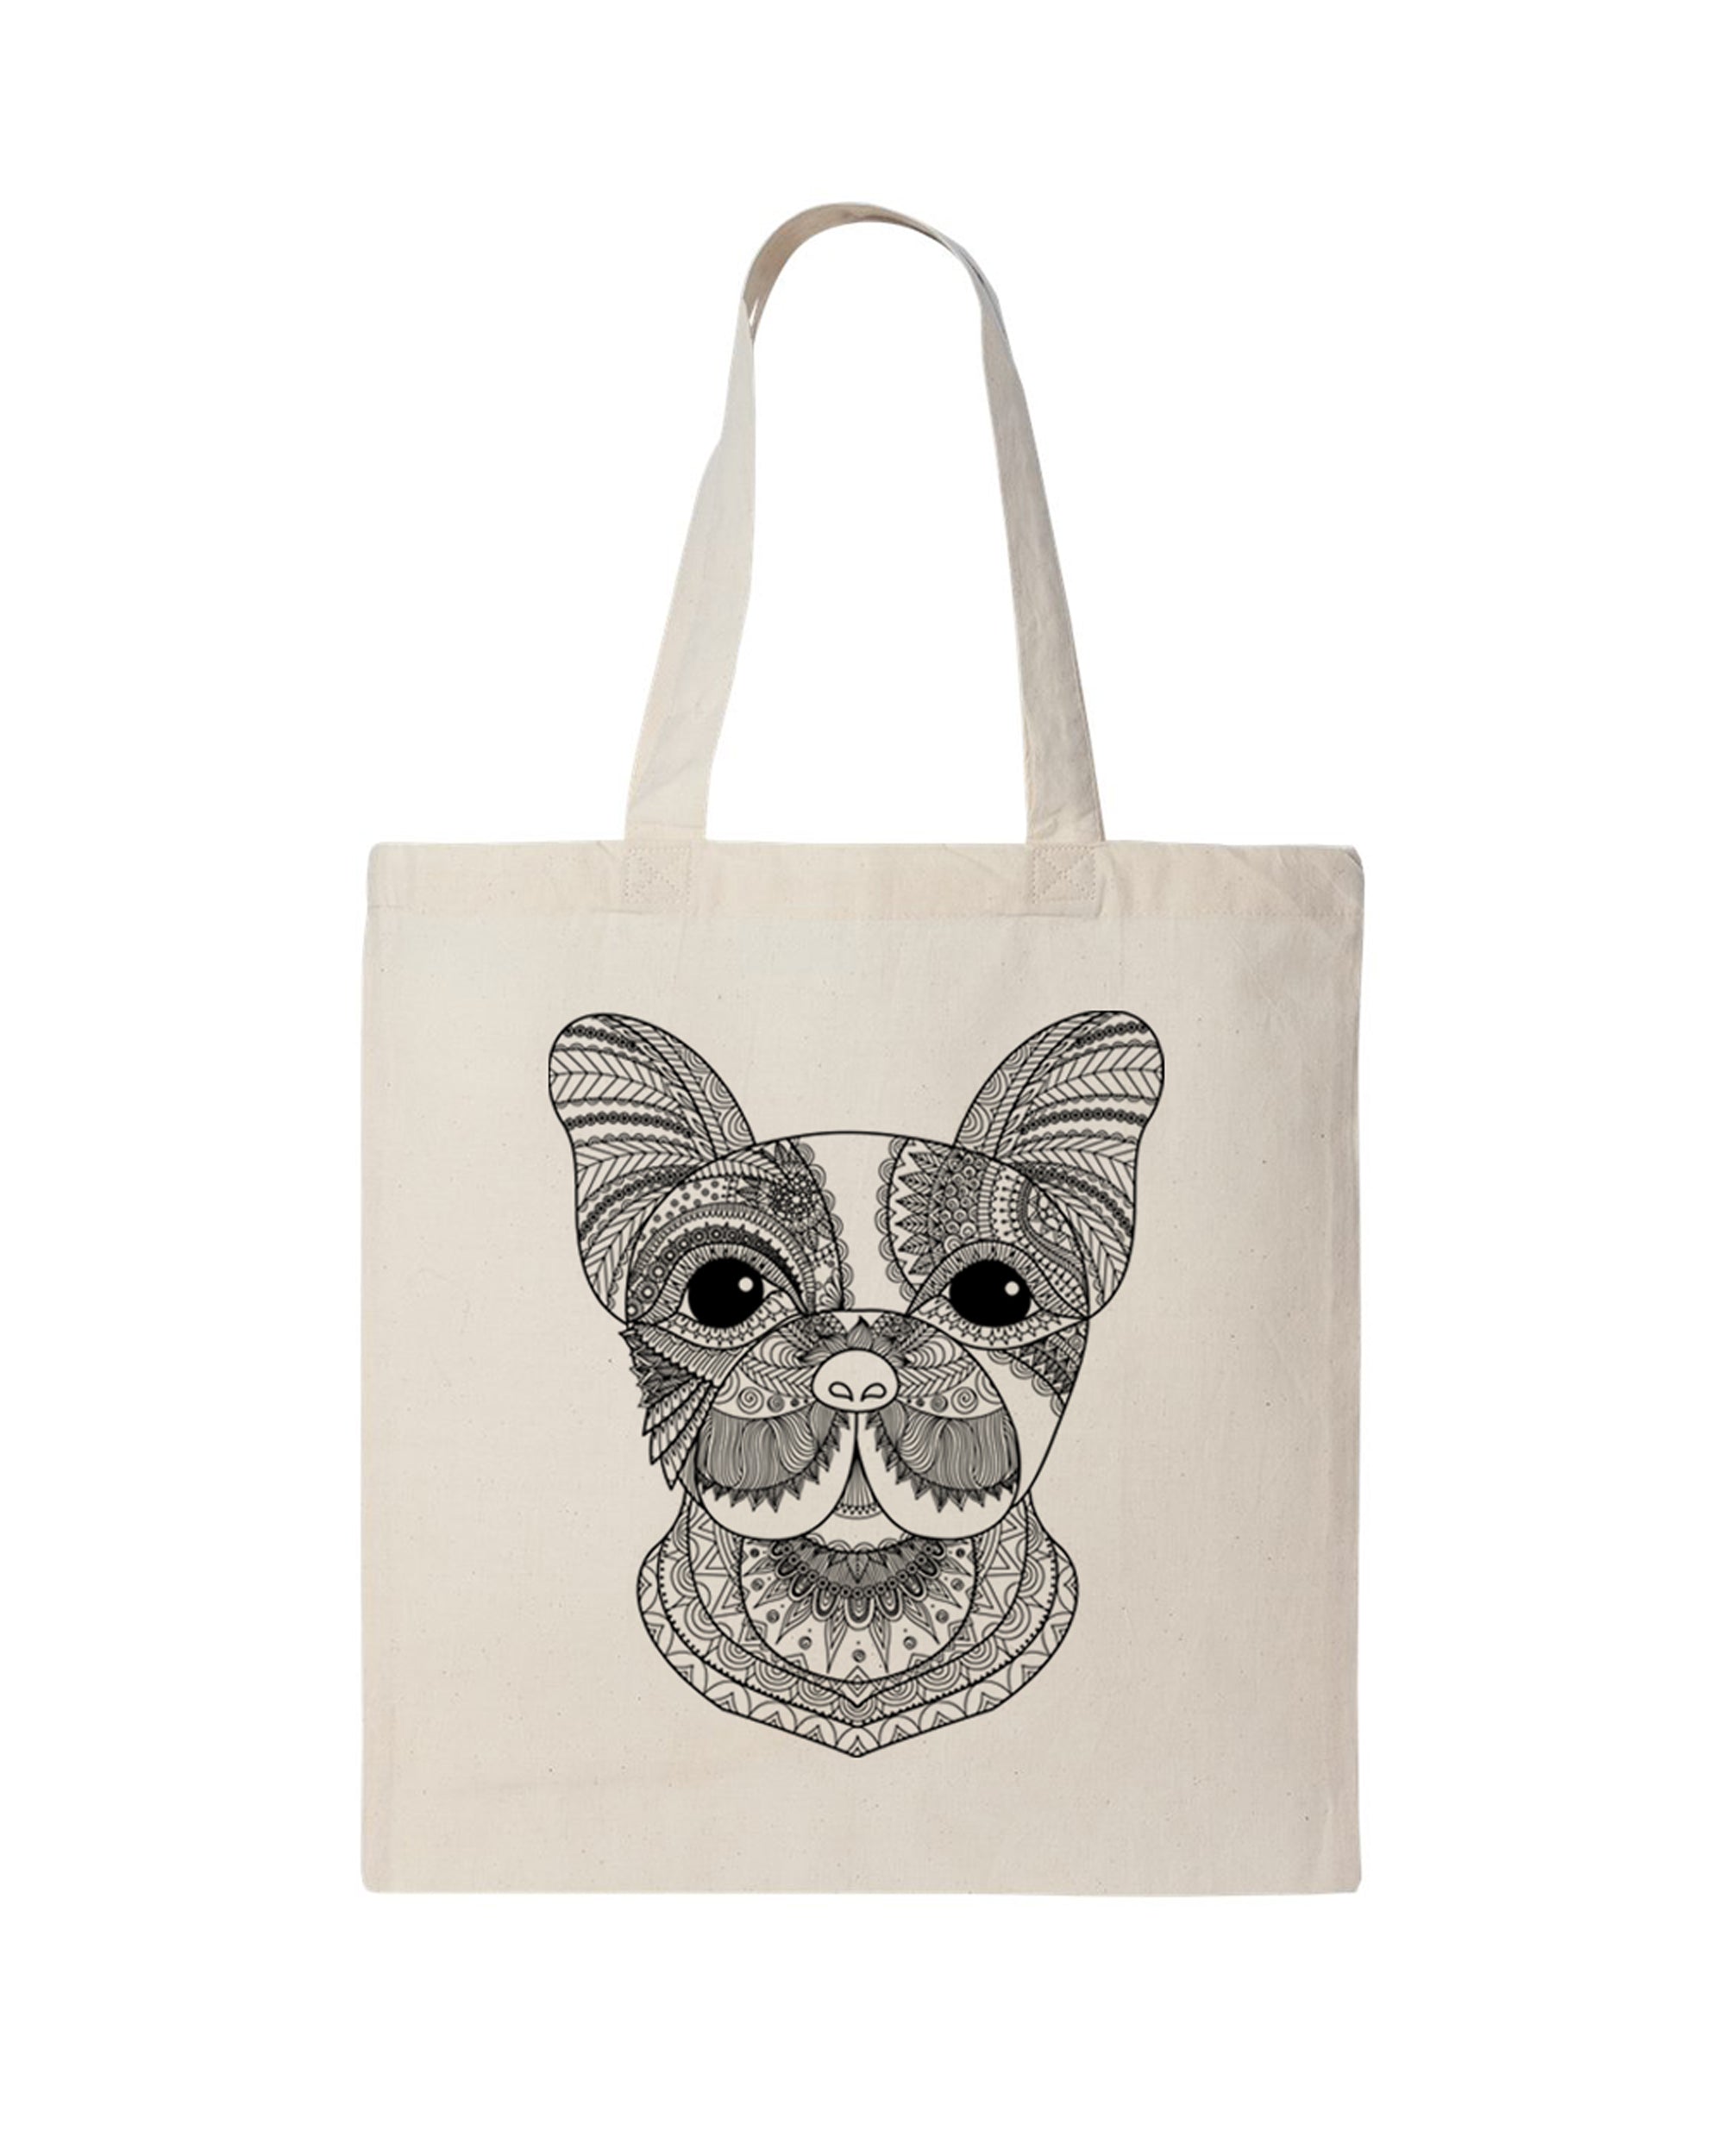 Dog Coloring Natural Canvas Tote Bag - Adorned By You